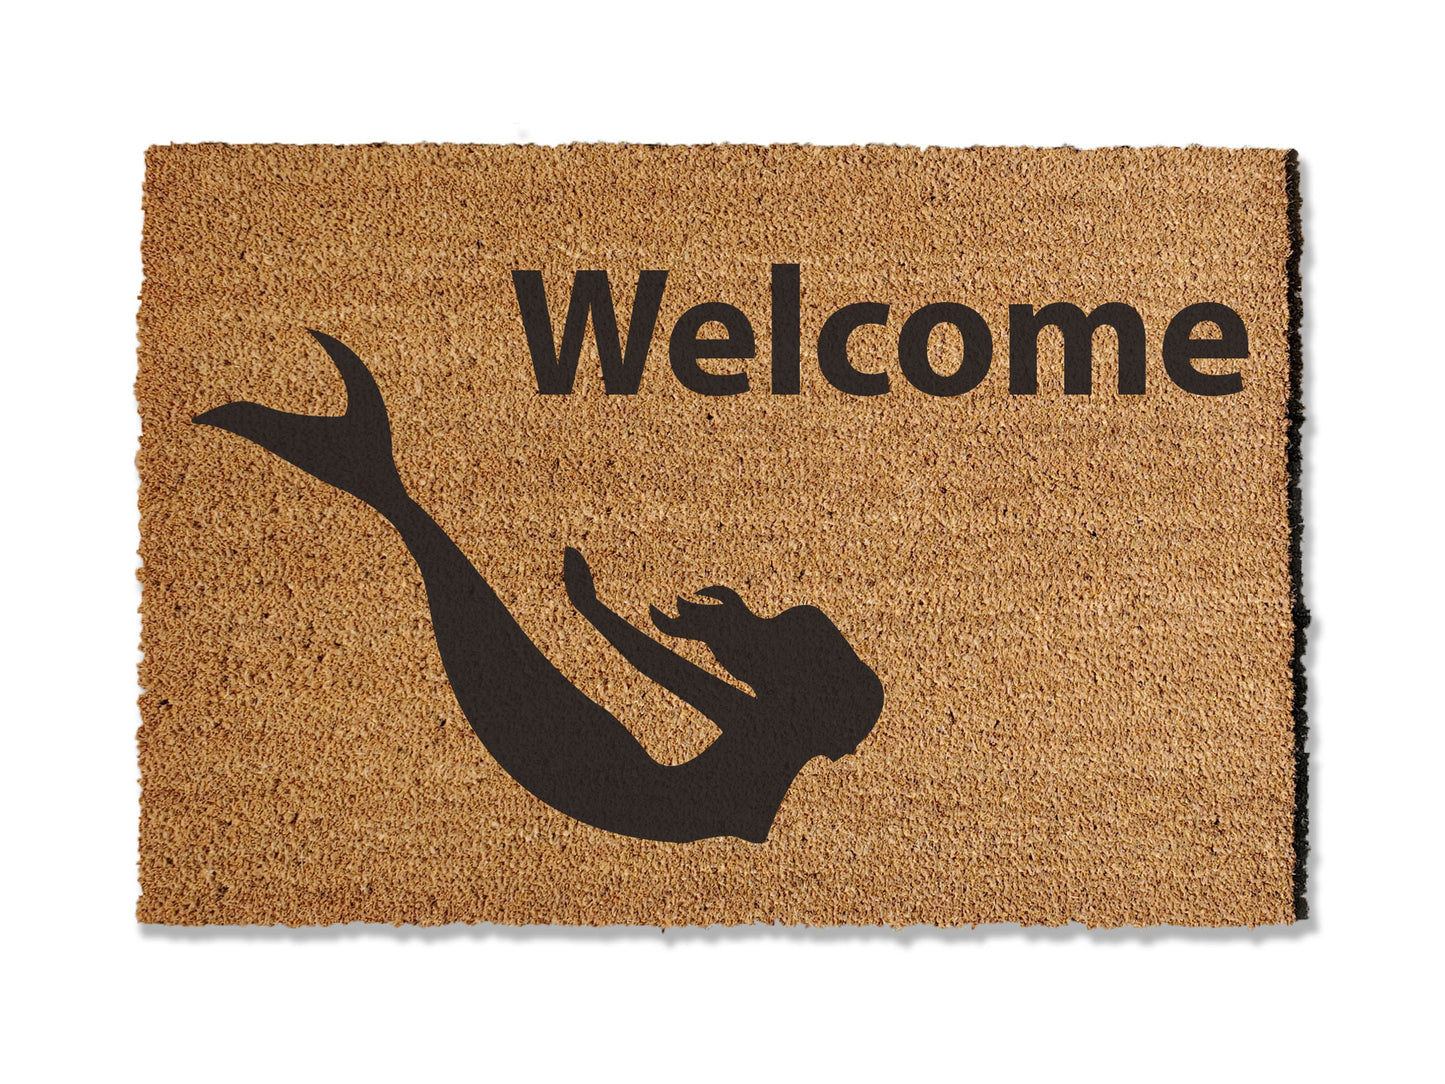 Welcome guests with a touch of enchantment using our mermaid-themed coir doormat. Let this mythical sea creature invite people into your home with its whimsical charm. Available in multiple sizes, this mat not only adds a magical touch to your doorstep but also excels at trapping dirt.